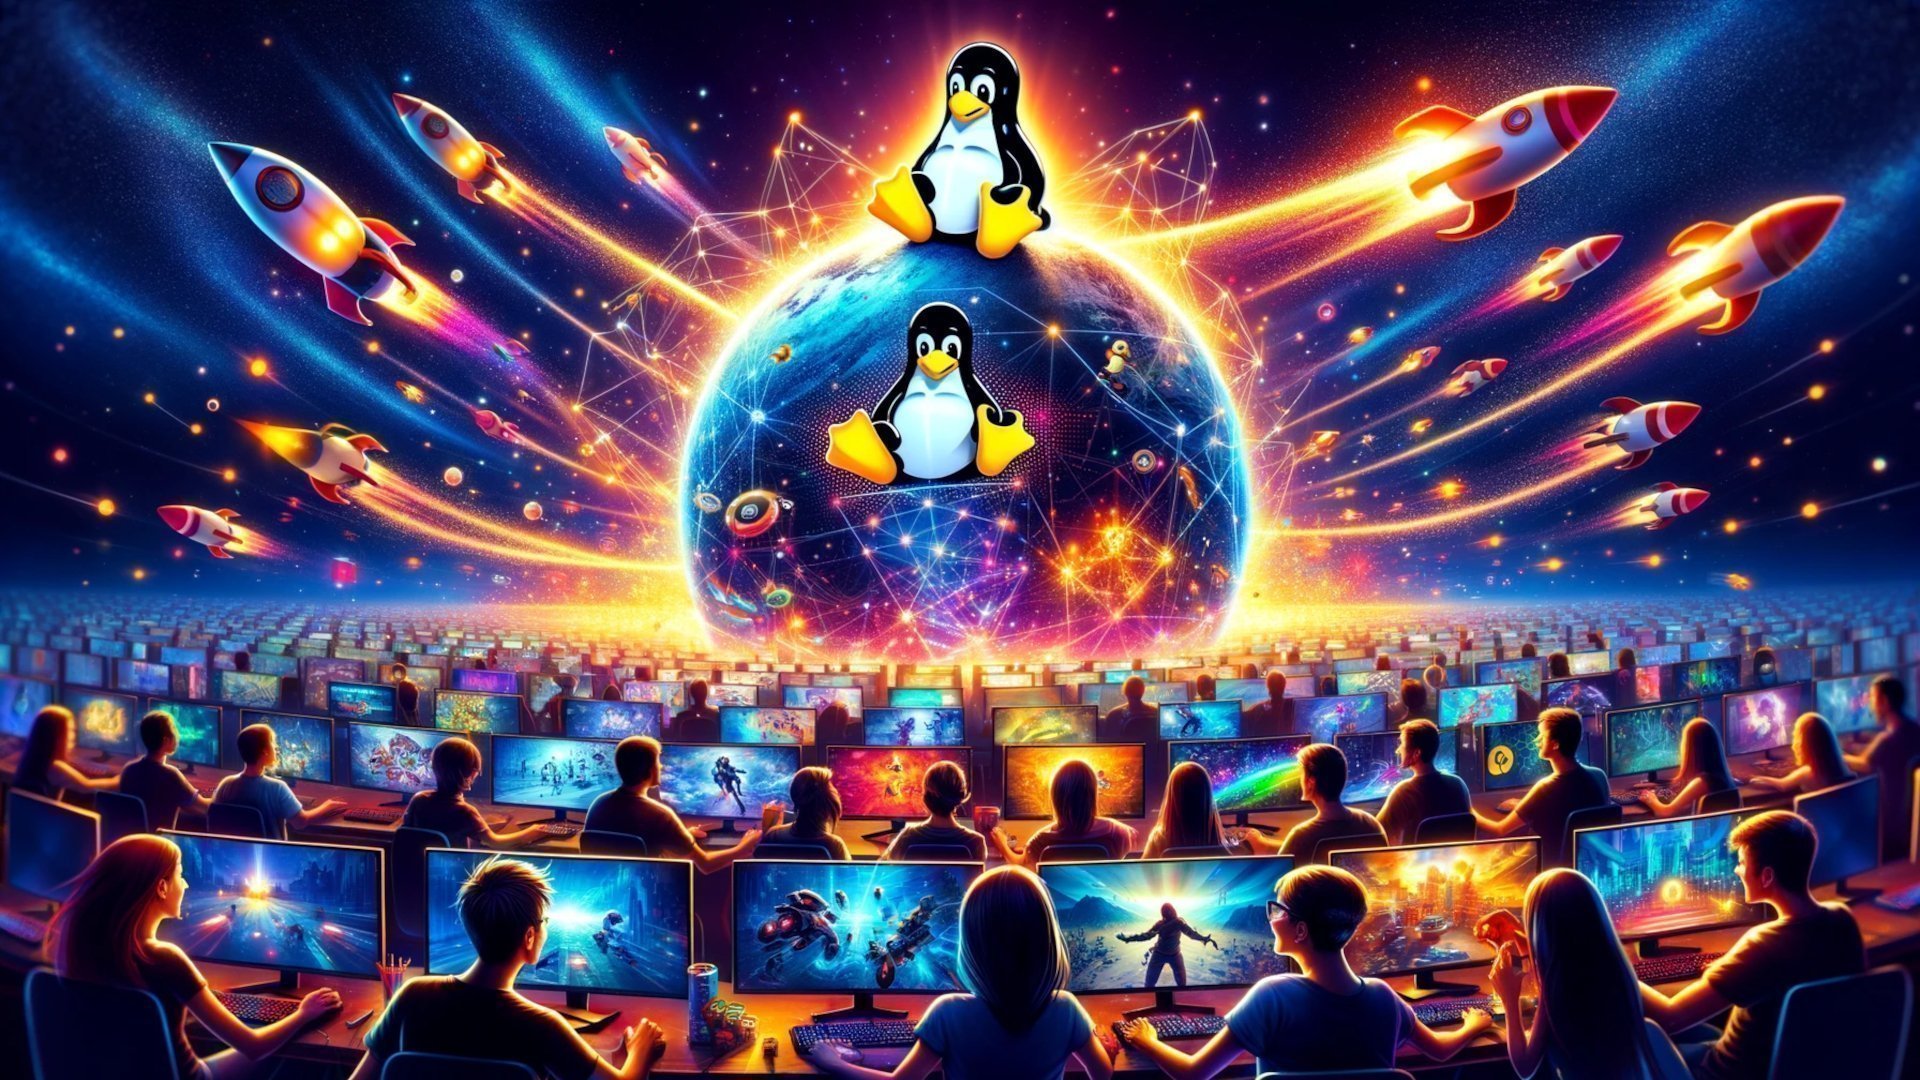 Top 5 Linux Distributions Optimized for Gaming Performance